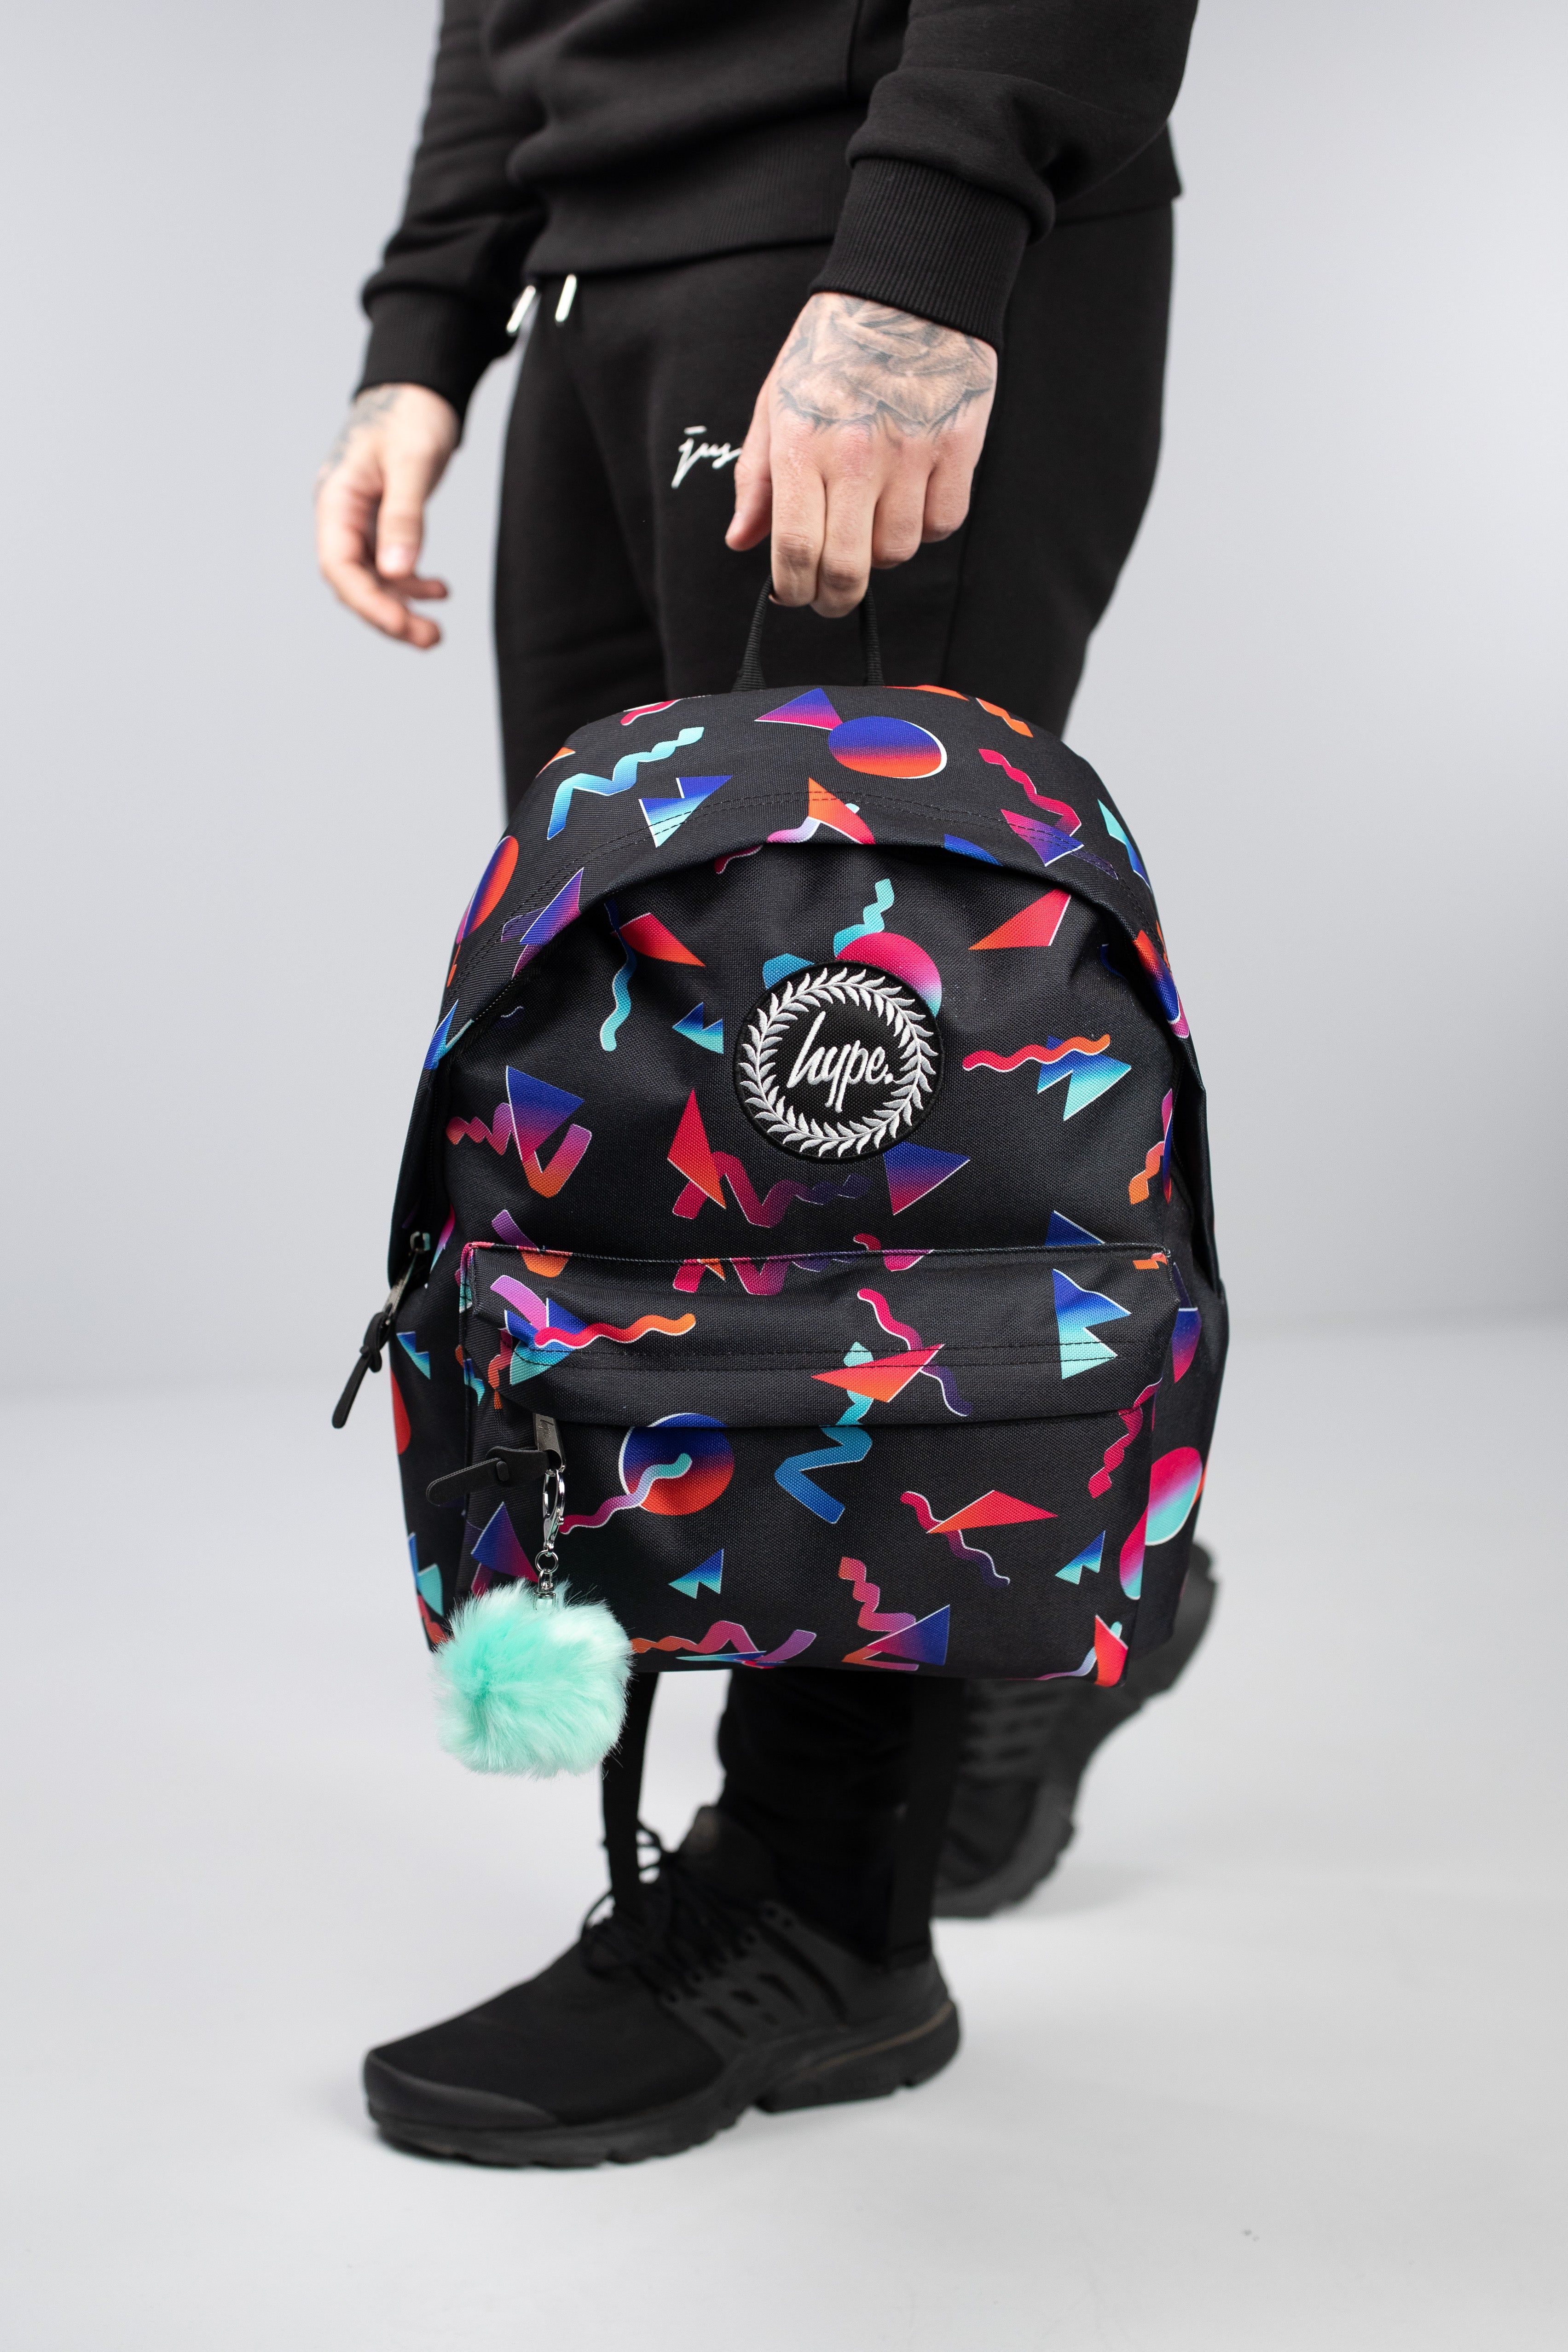 With a 90's throwback inspiration behind the bag, it's perfect to store your gym and dance kits. The HYPE. neon shapes backpack is designed with a black fabric base, with colour contrasting triangle, circle and zig-zag shapes in reds, pinks, oranges and blues. This backpack measures at 42cms x 30cms x 12cms, the right amount of room you require plus a lil' extra. The straps contain padding, creating the ultimate comfort. Wipe clean only.